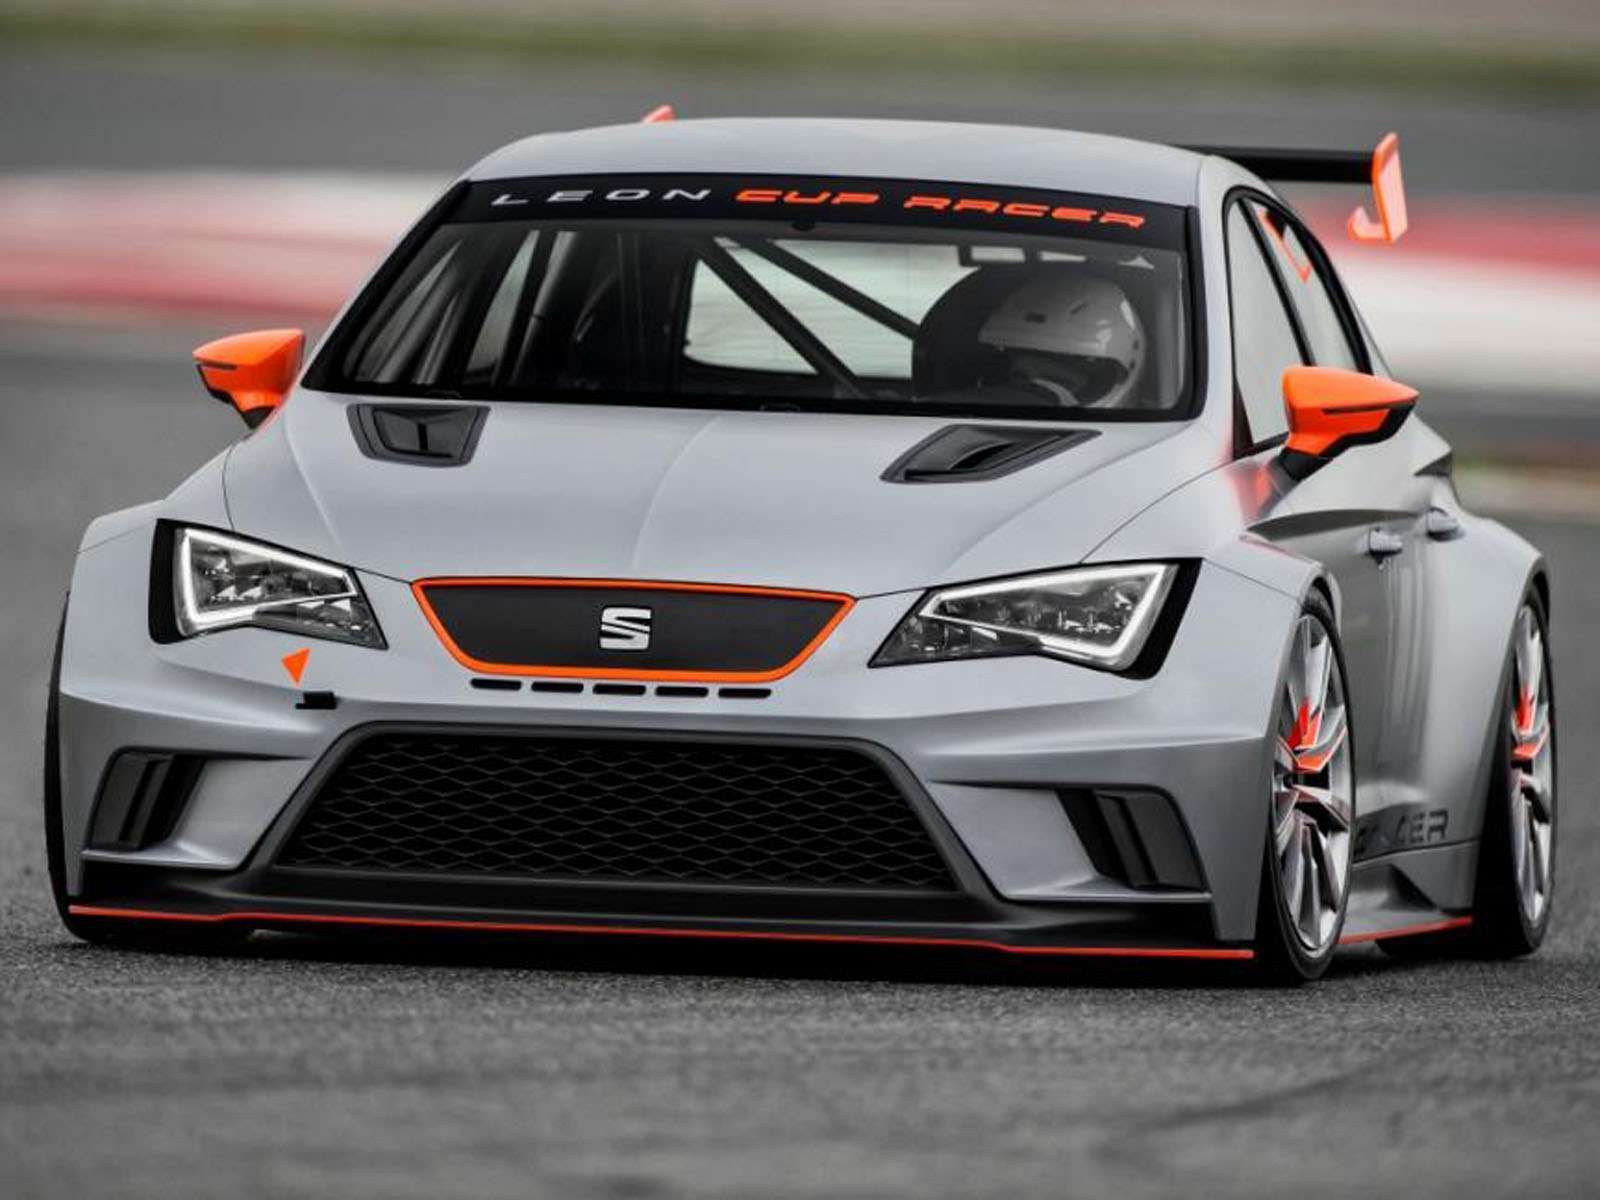 27 06 2014_SEAT Leon Cup Racer on Goodwood Festival of Speed